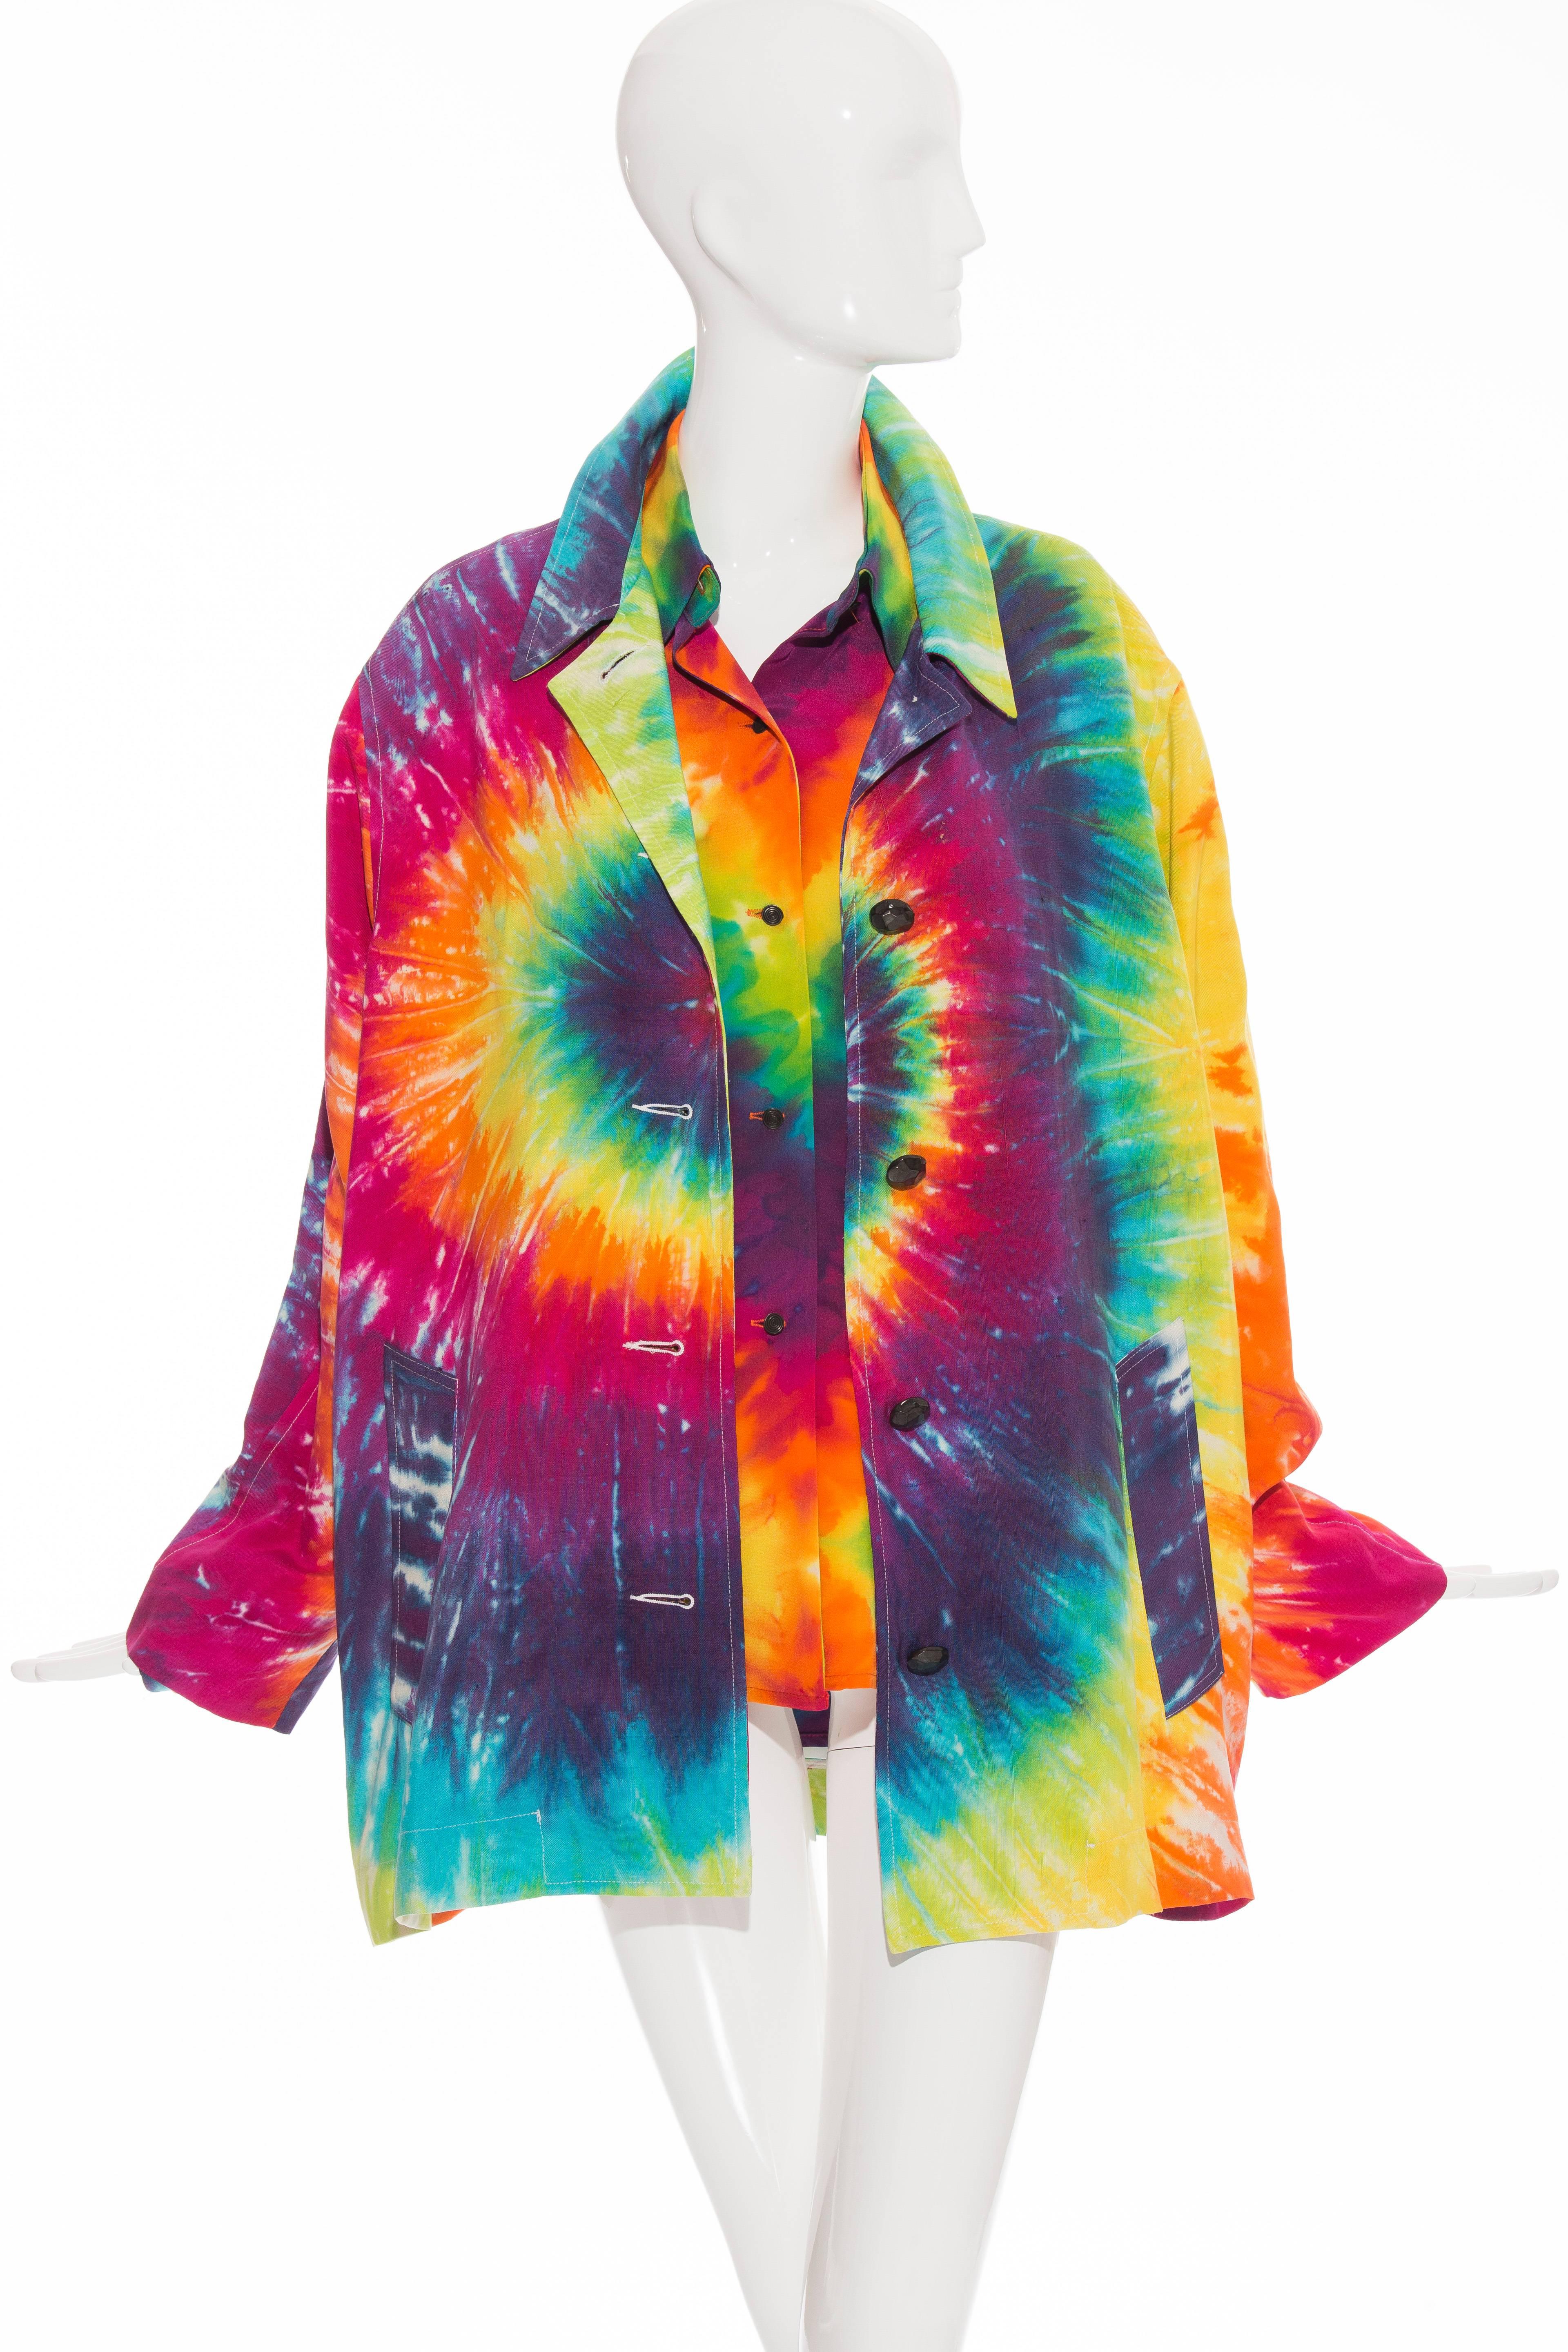 Todd Oldham, Spring 1994,  jacket and blouse by the late tie-dye artist Helen Gist-Tselikidis. Button front jacket with two front pockets and fully lined in silk with button front blouse.

Jacket: size M Bust 48 inches, Waist 50, Hips 50 Inches,